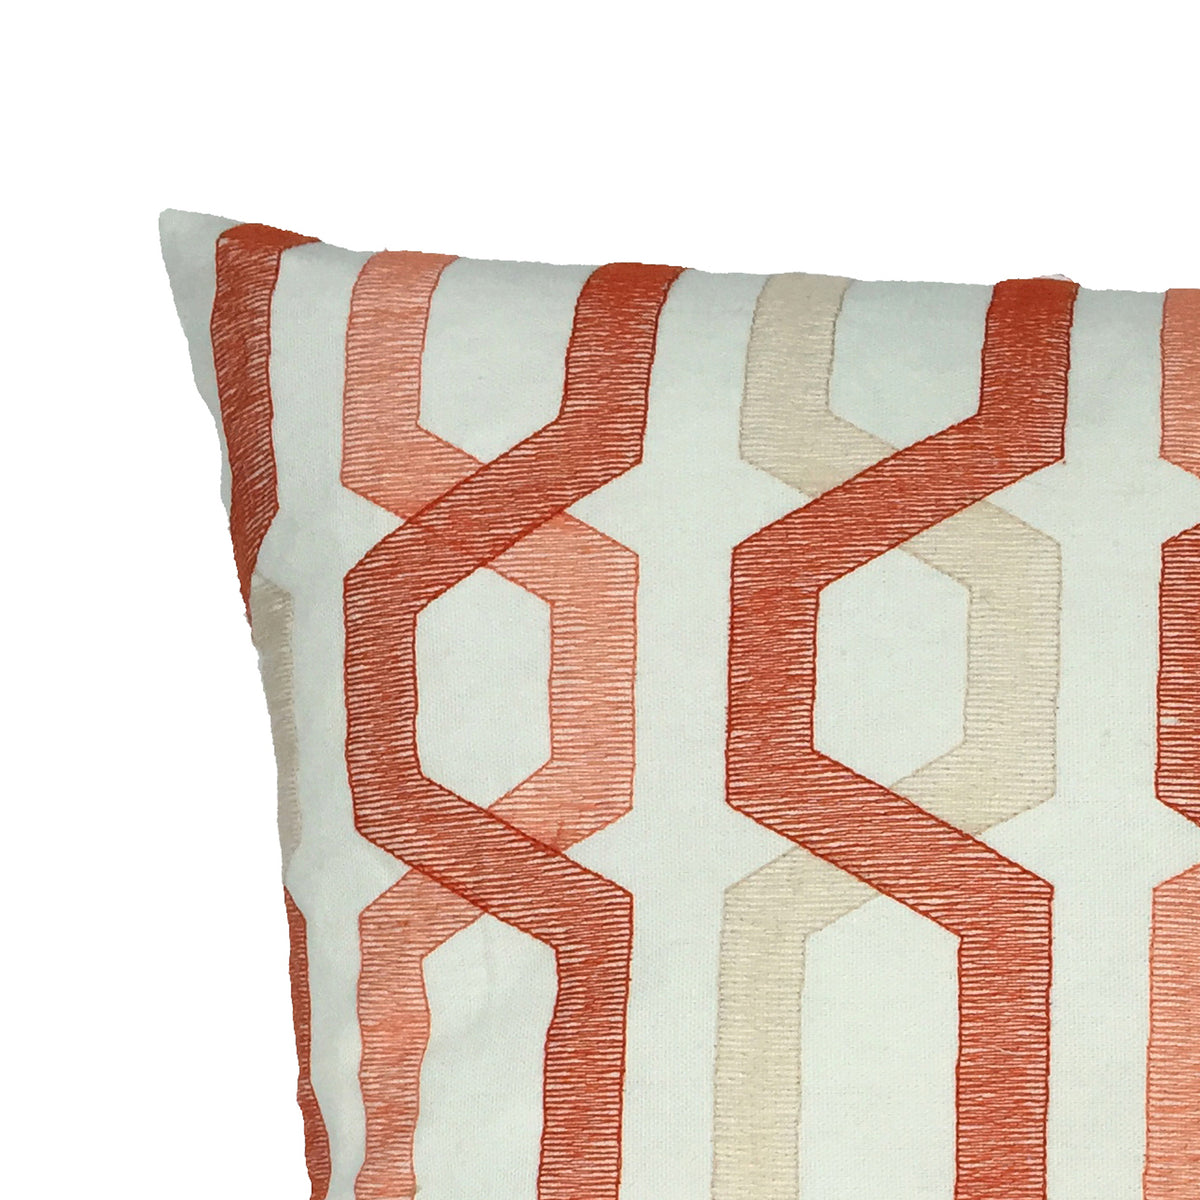 Contemporary Cotton Pillow with Geometric Embroidery, Red and Cream - BM200585